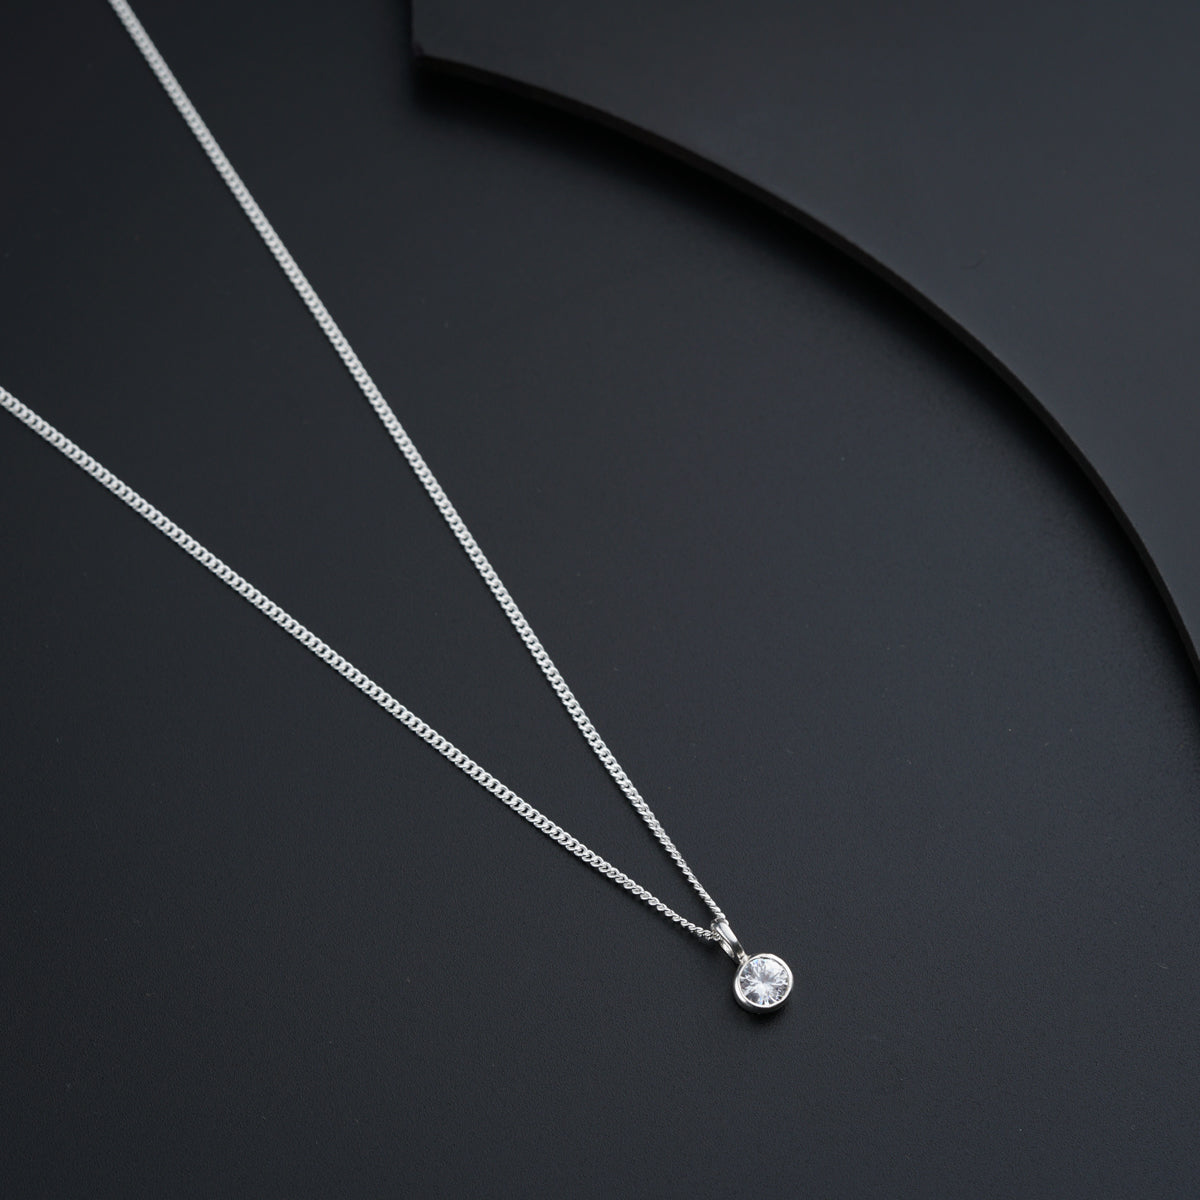 Silver Necklace with CZ Pendant